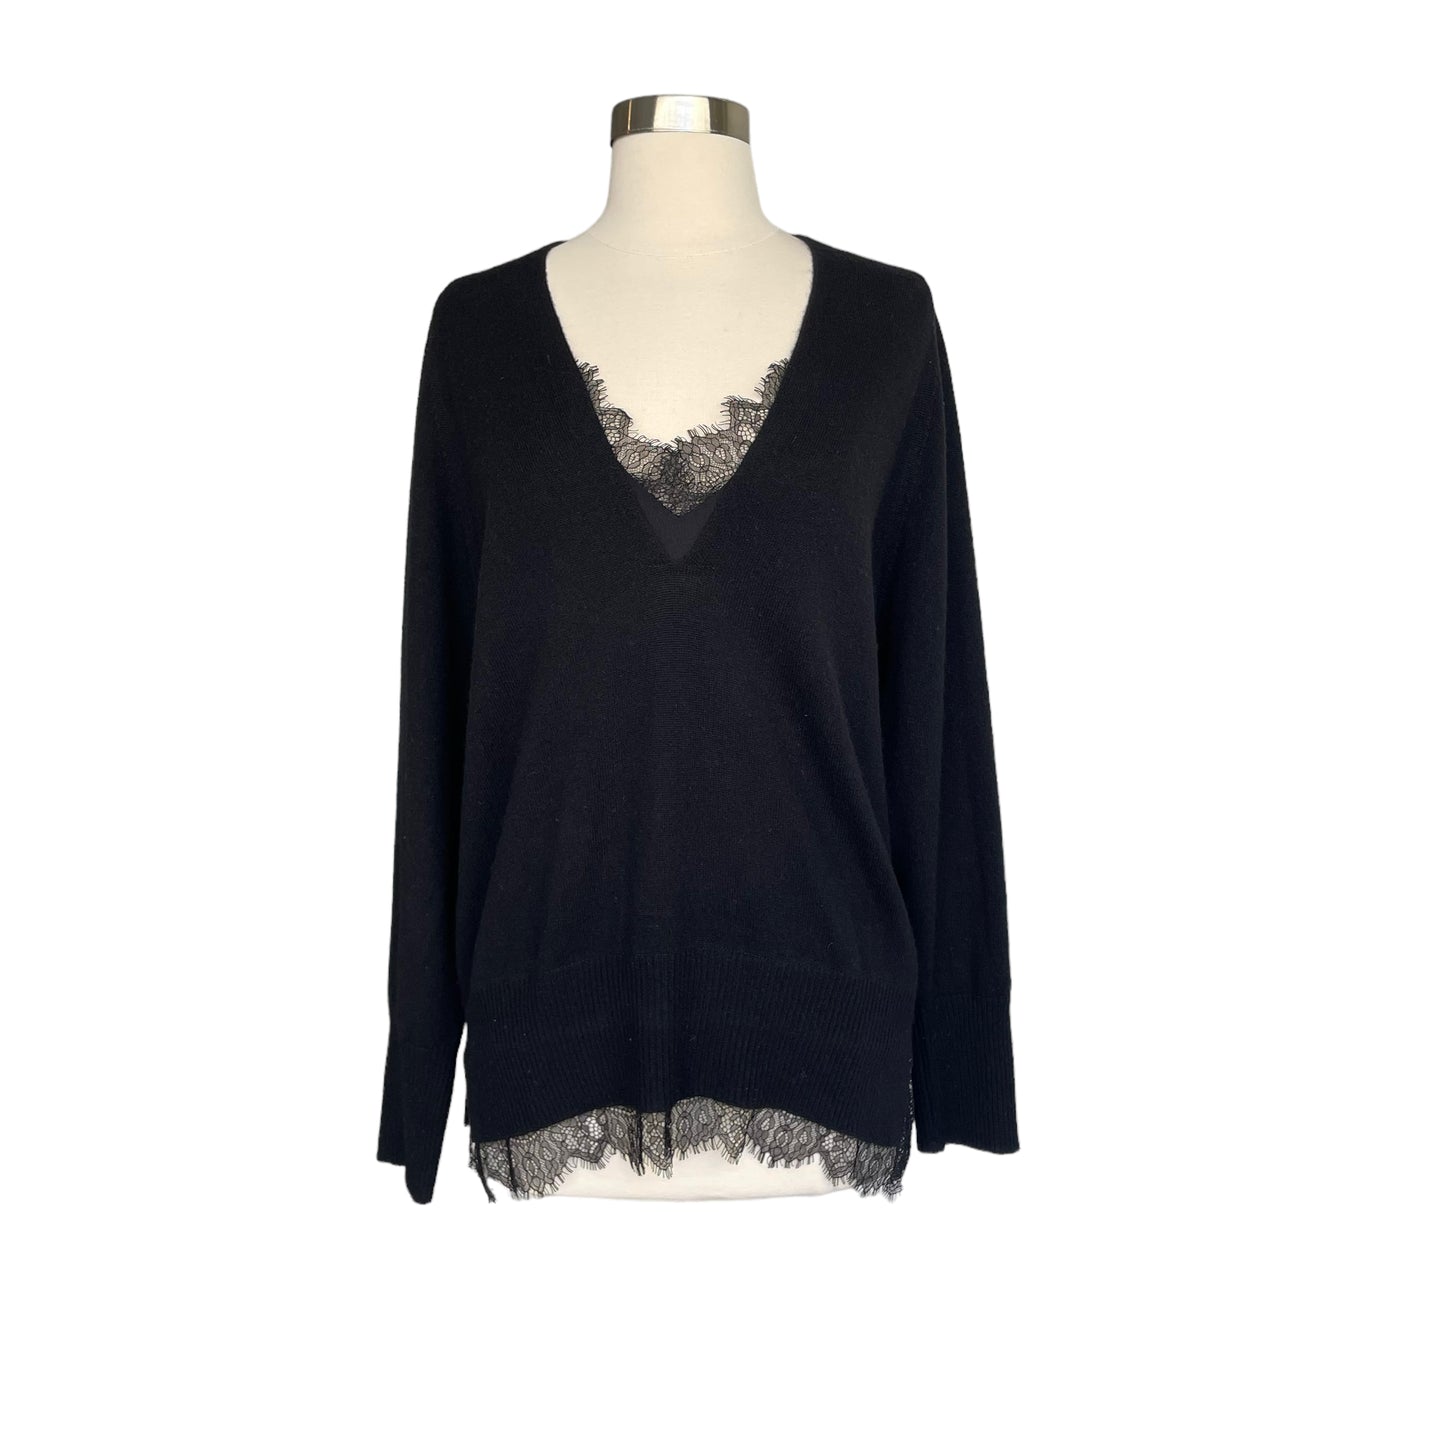 Cashmere and Lace Black Sweater - S